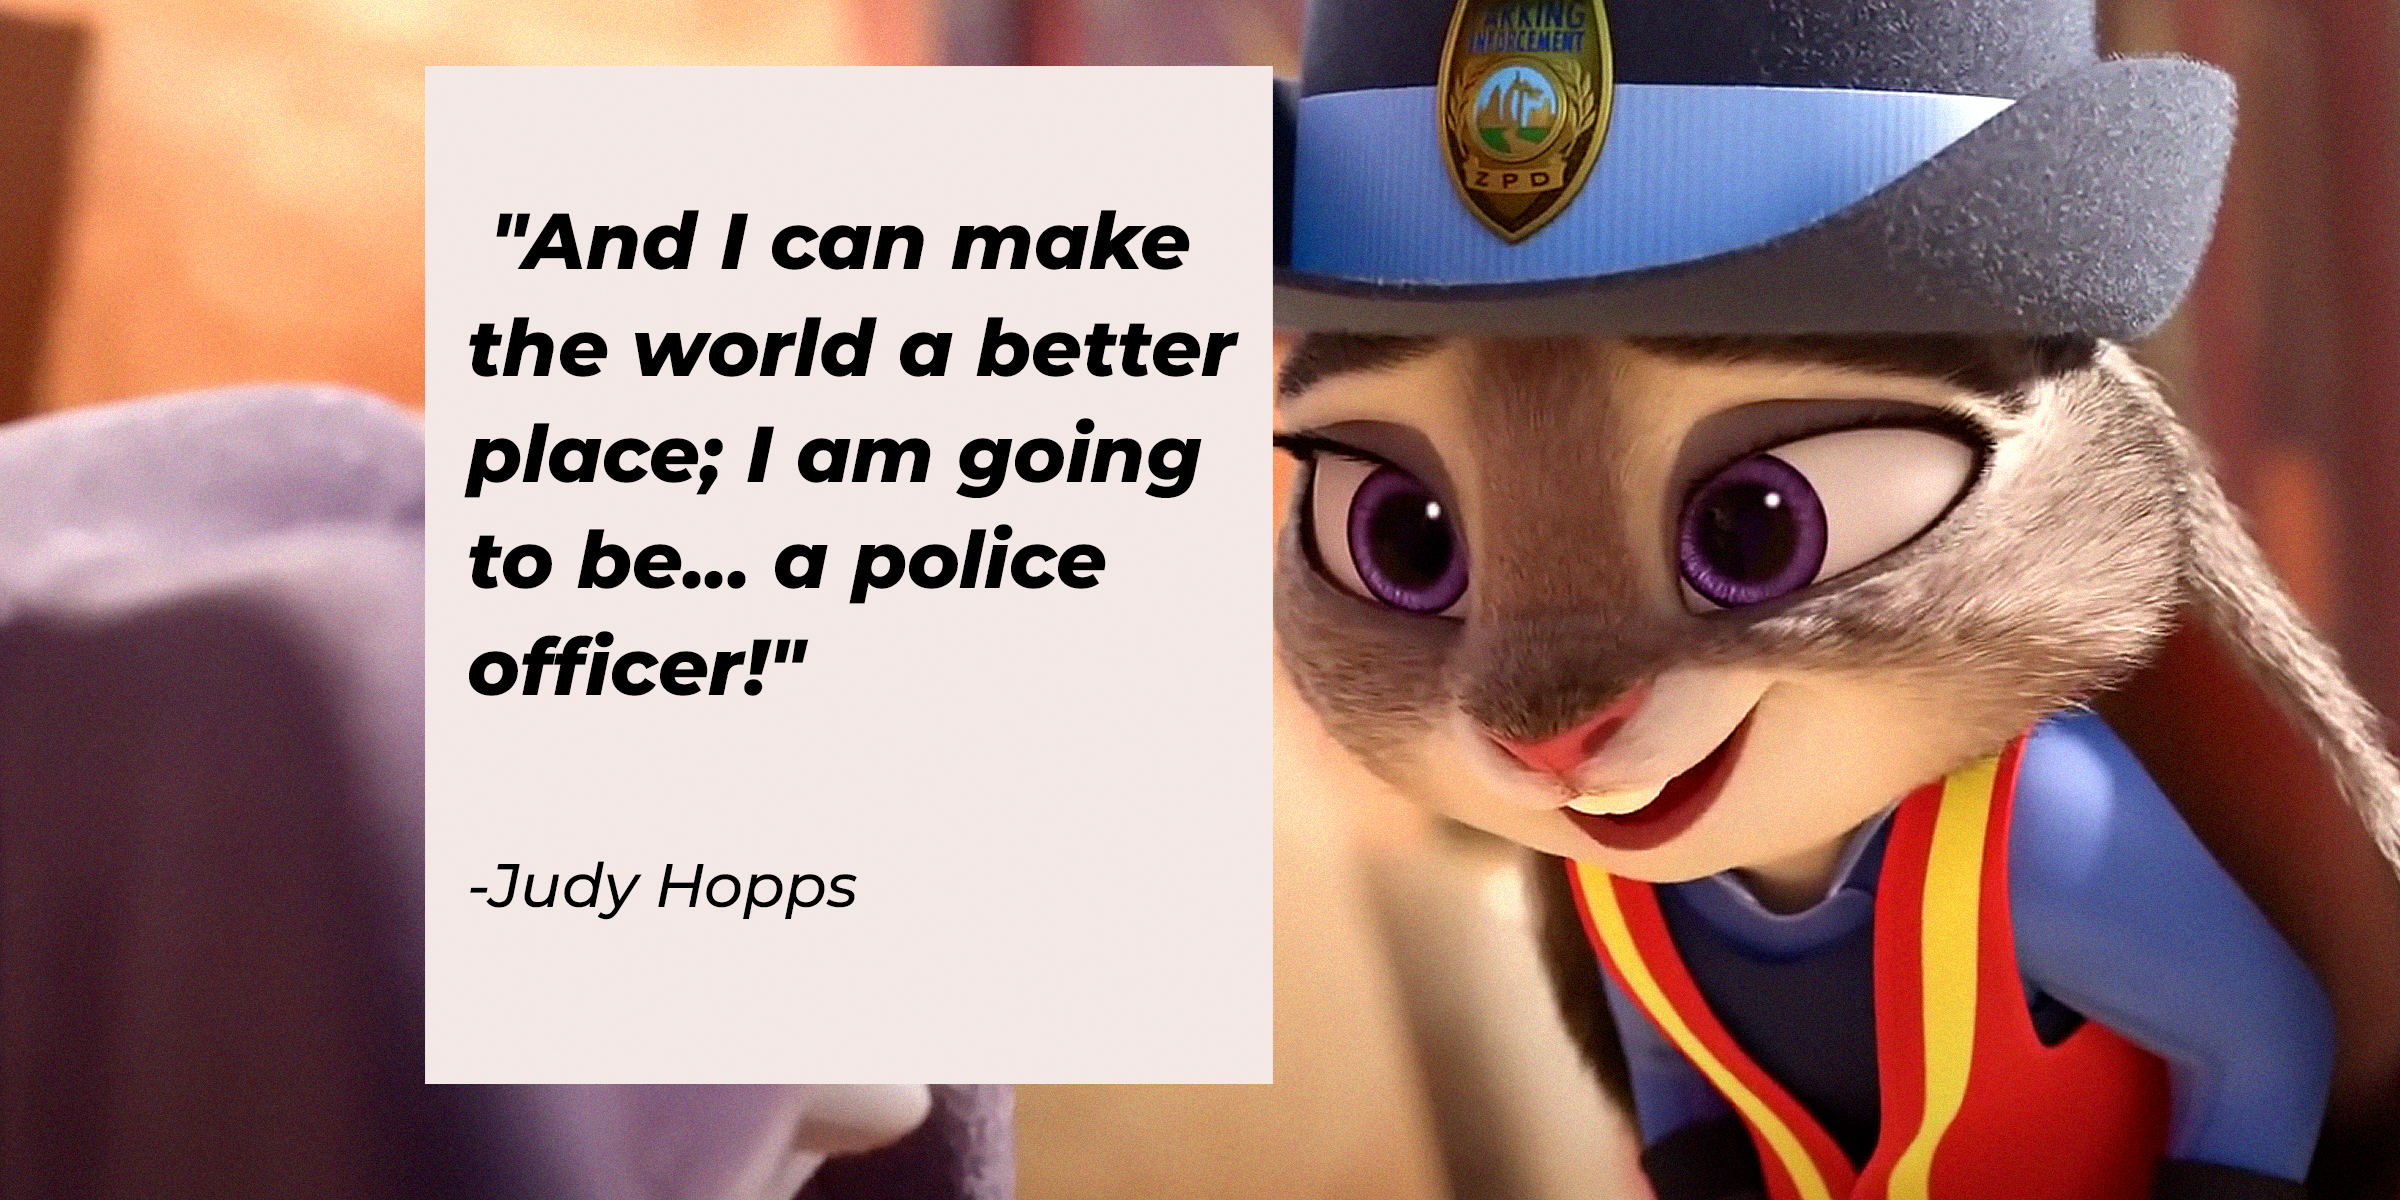 A photo of Jody Hopps with Jody Hopps' quote: "And I can make the world a better place; I am going to be... a police officer!" | Source: facebook.com/DisneyZootopia